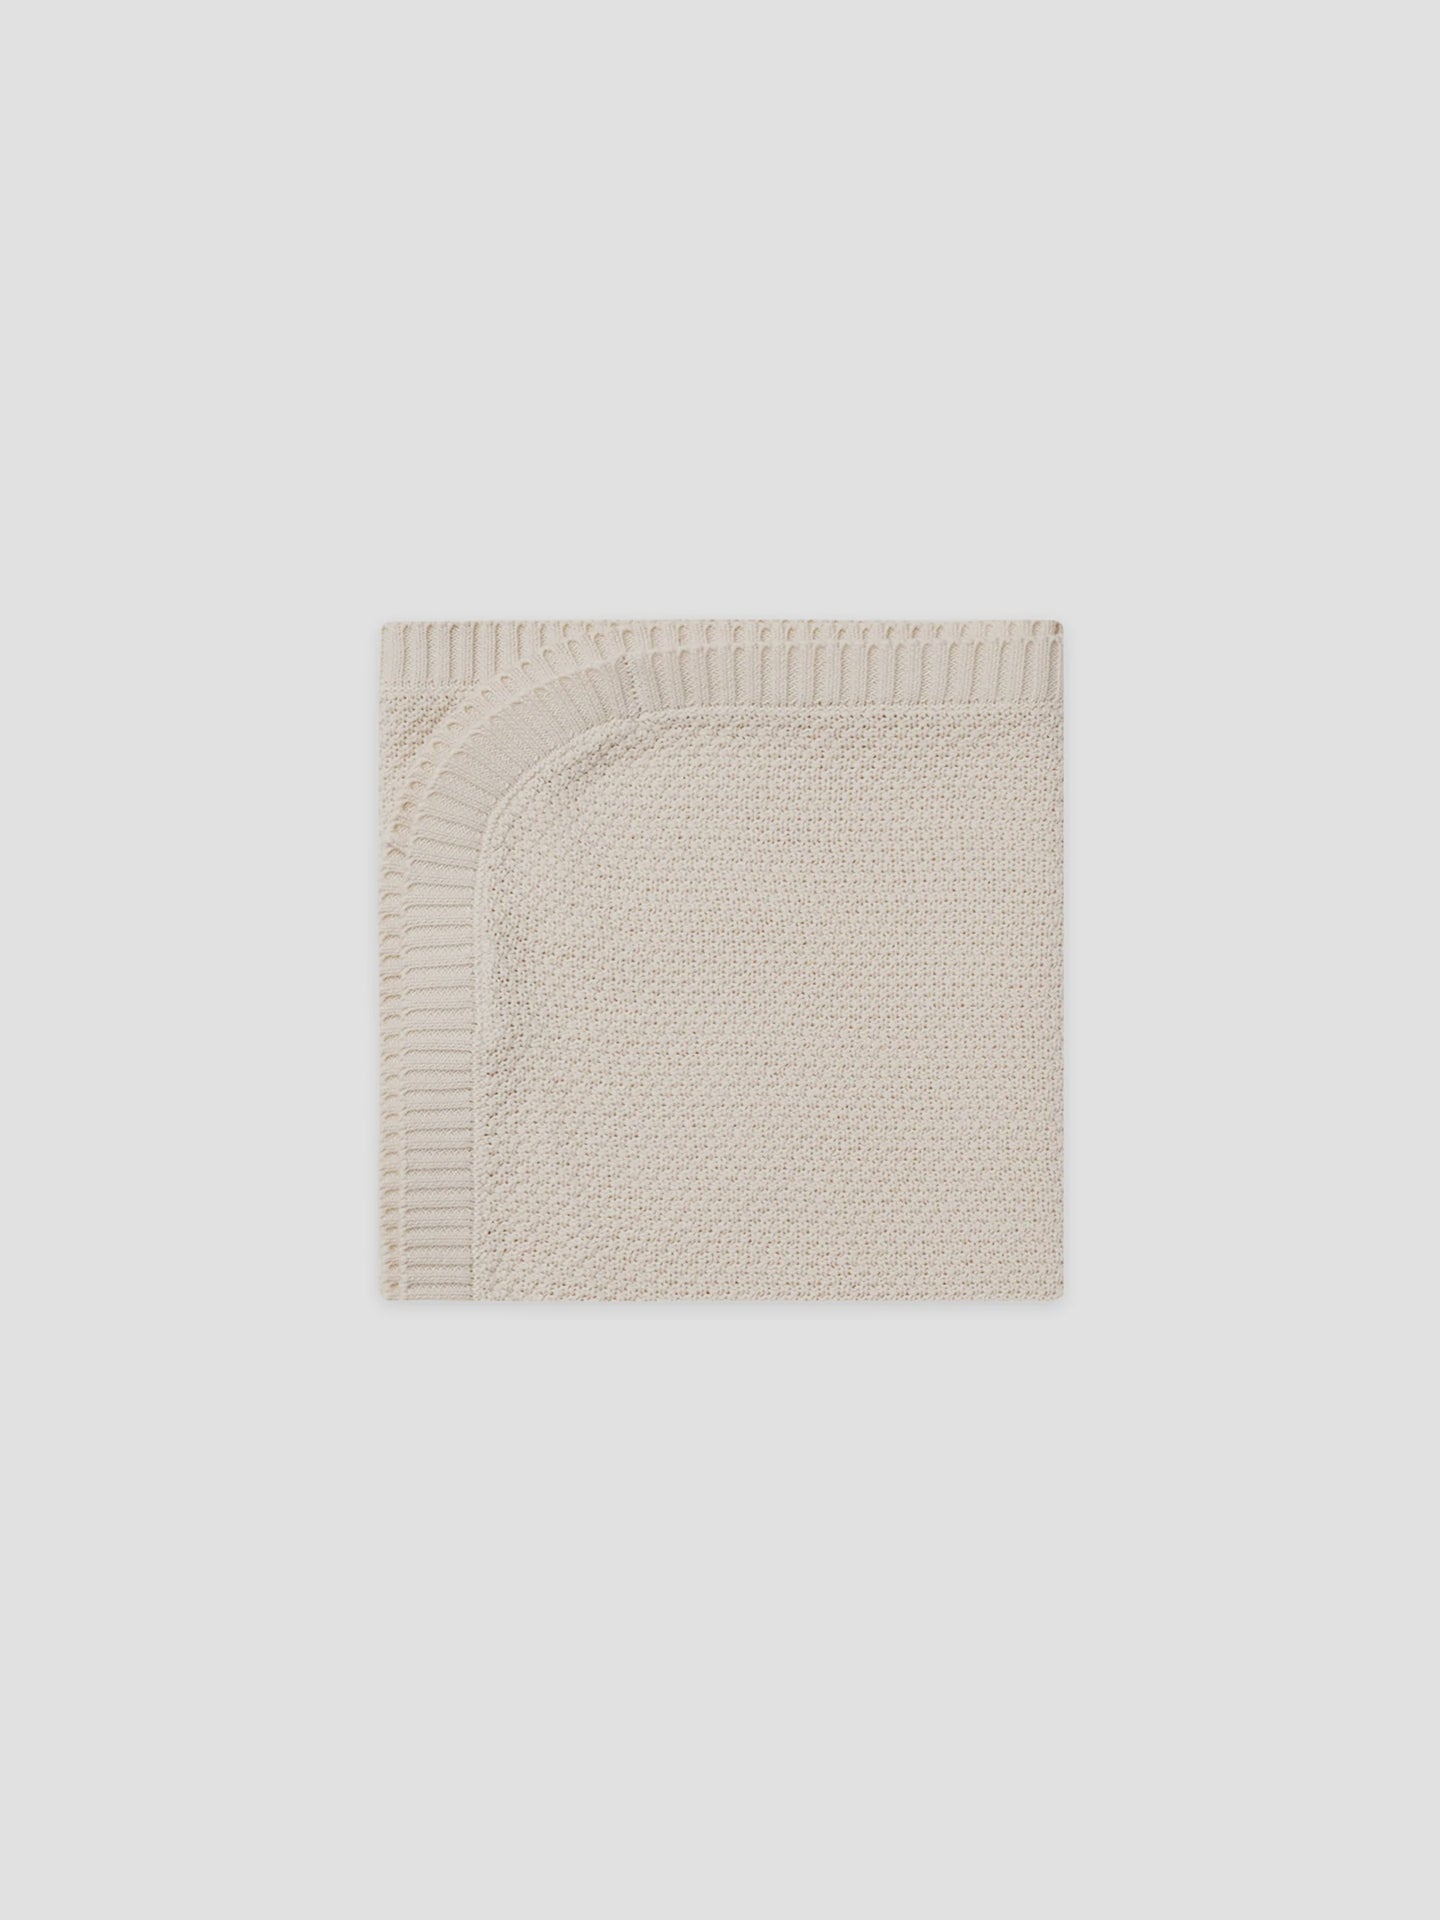 Quincy Mae - Organic Knit Baby Blanket - Natural